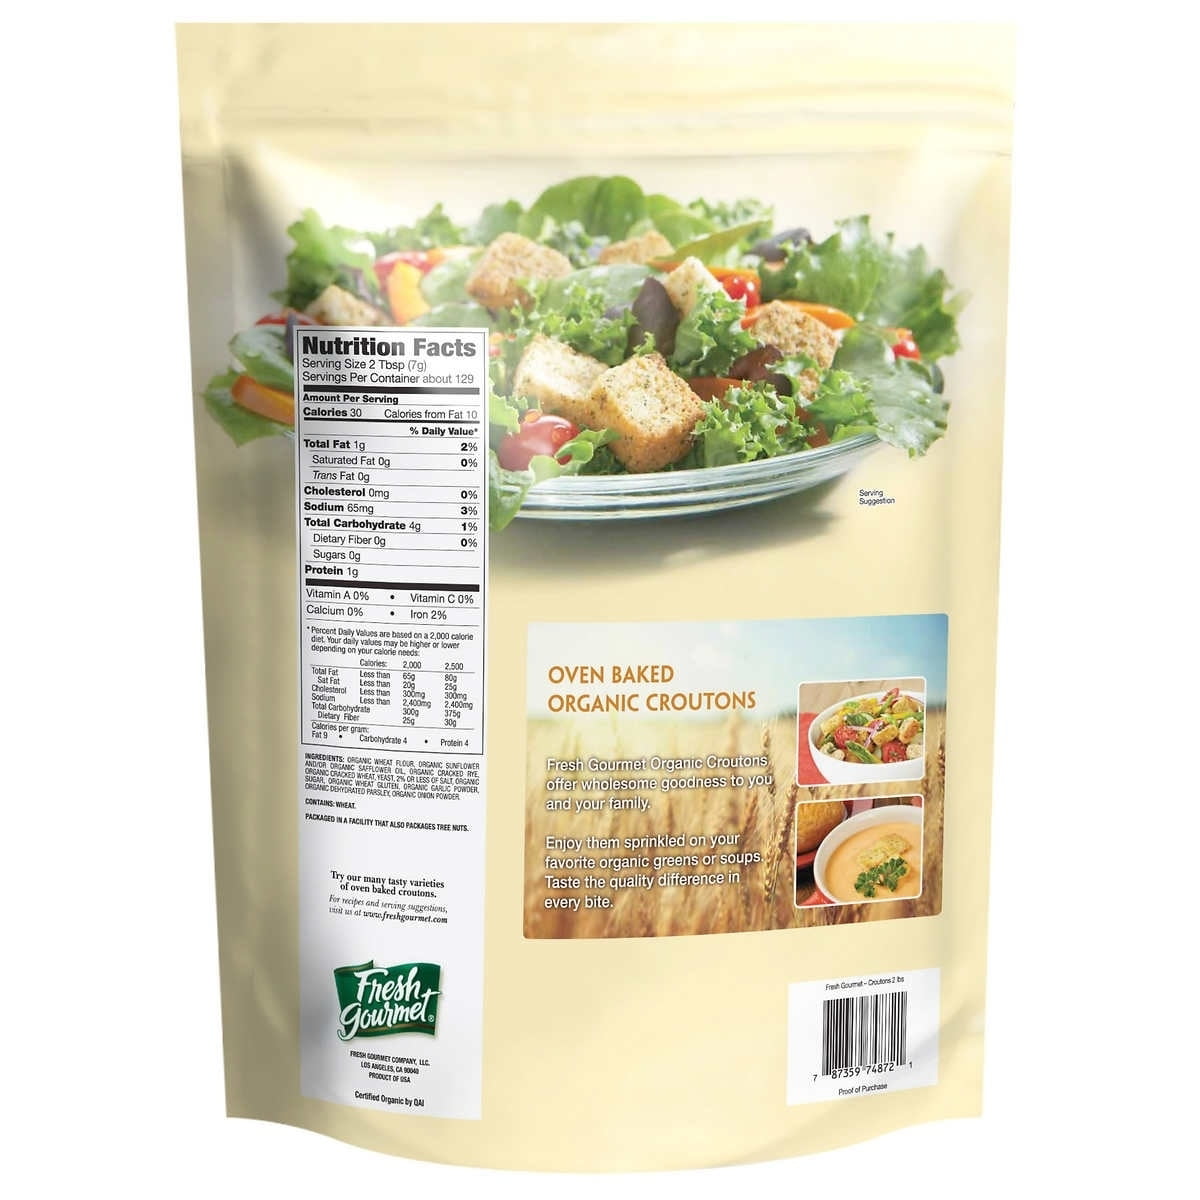 Save on Nature's Promise Organic Croutons Seasoned Order Online